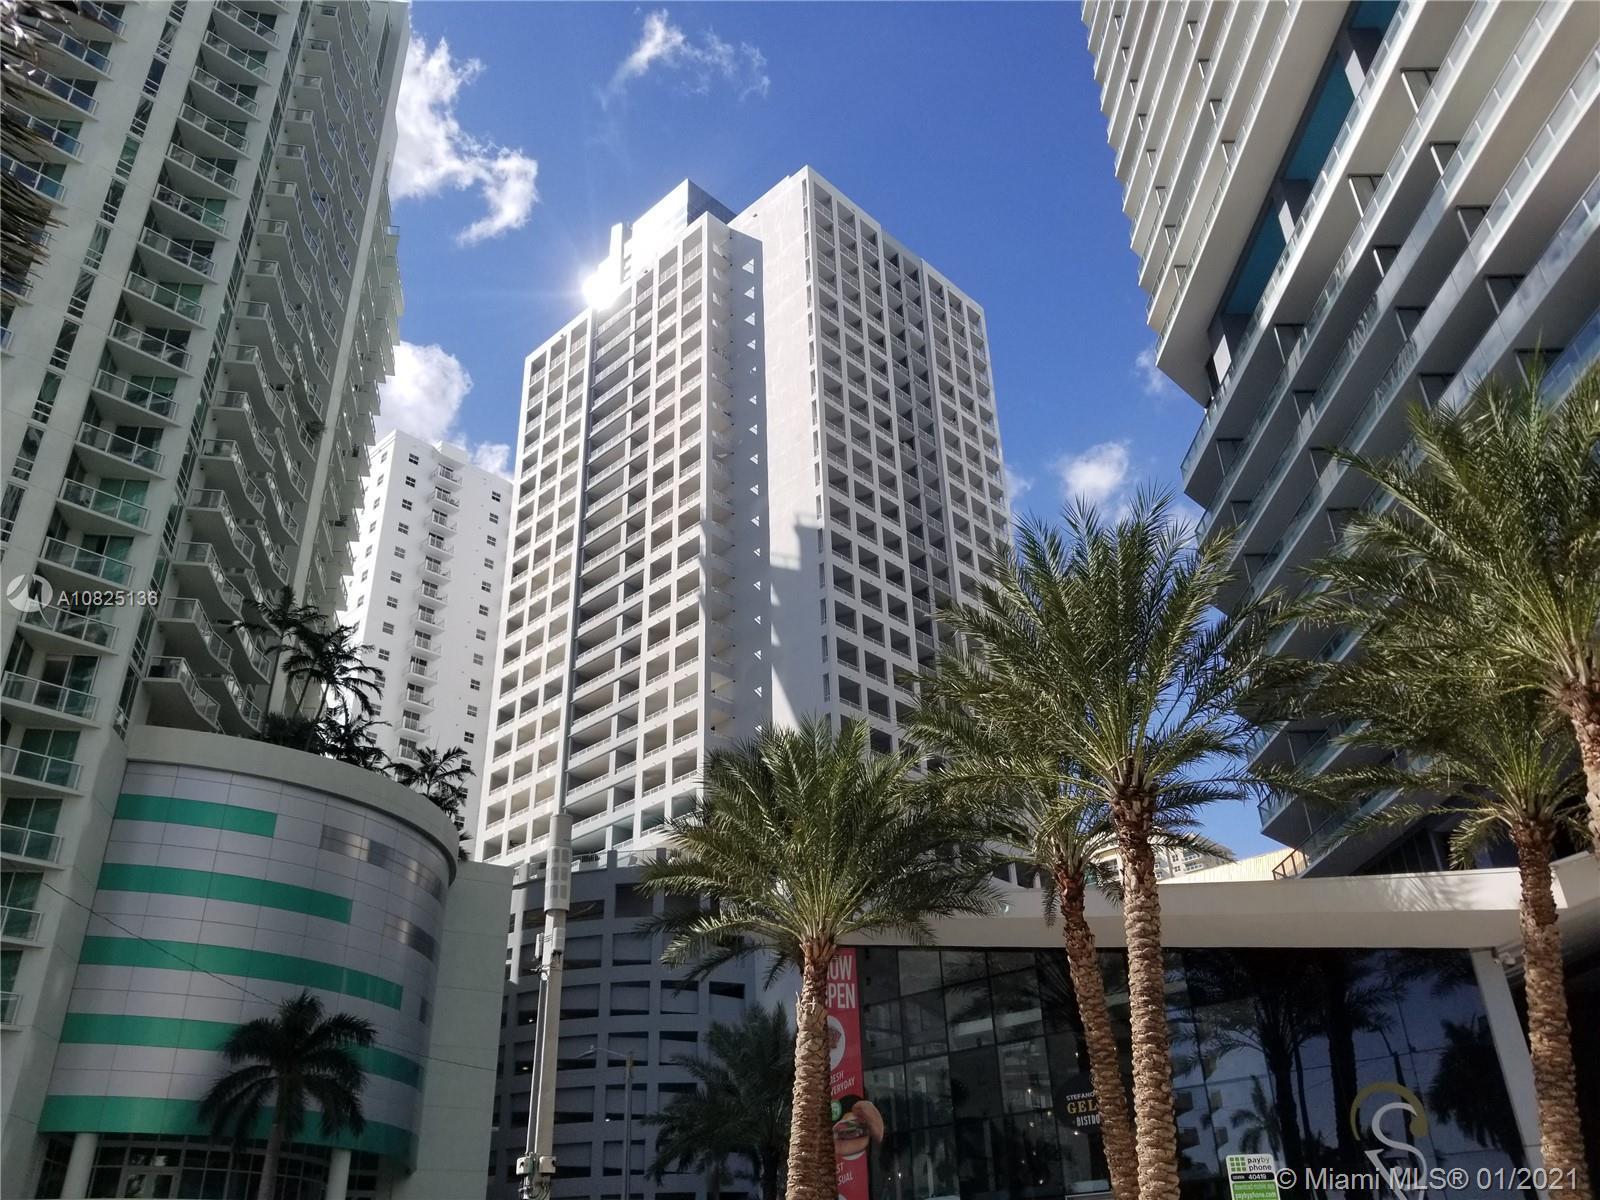 Sail on Brickell - Condos for sale